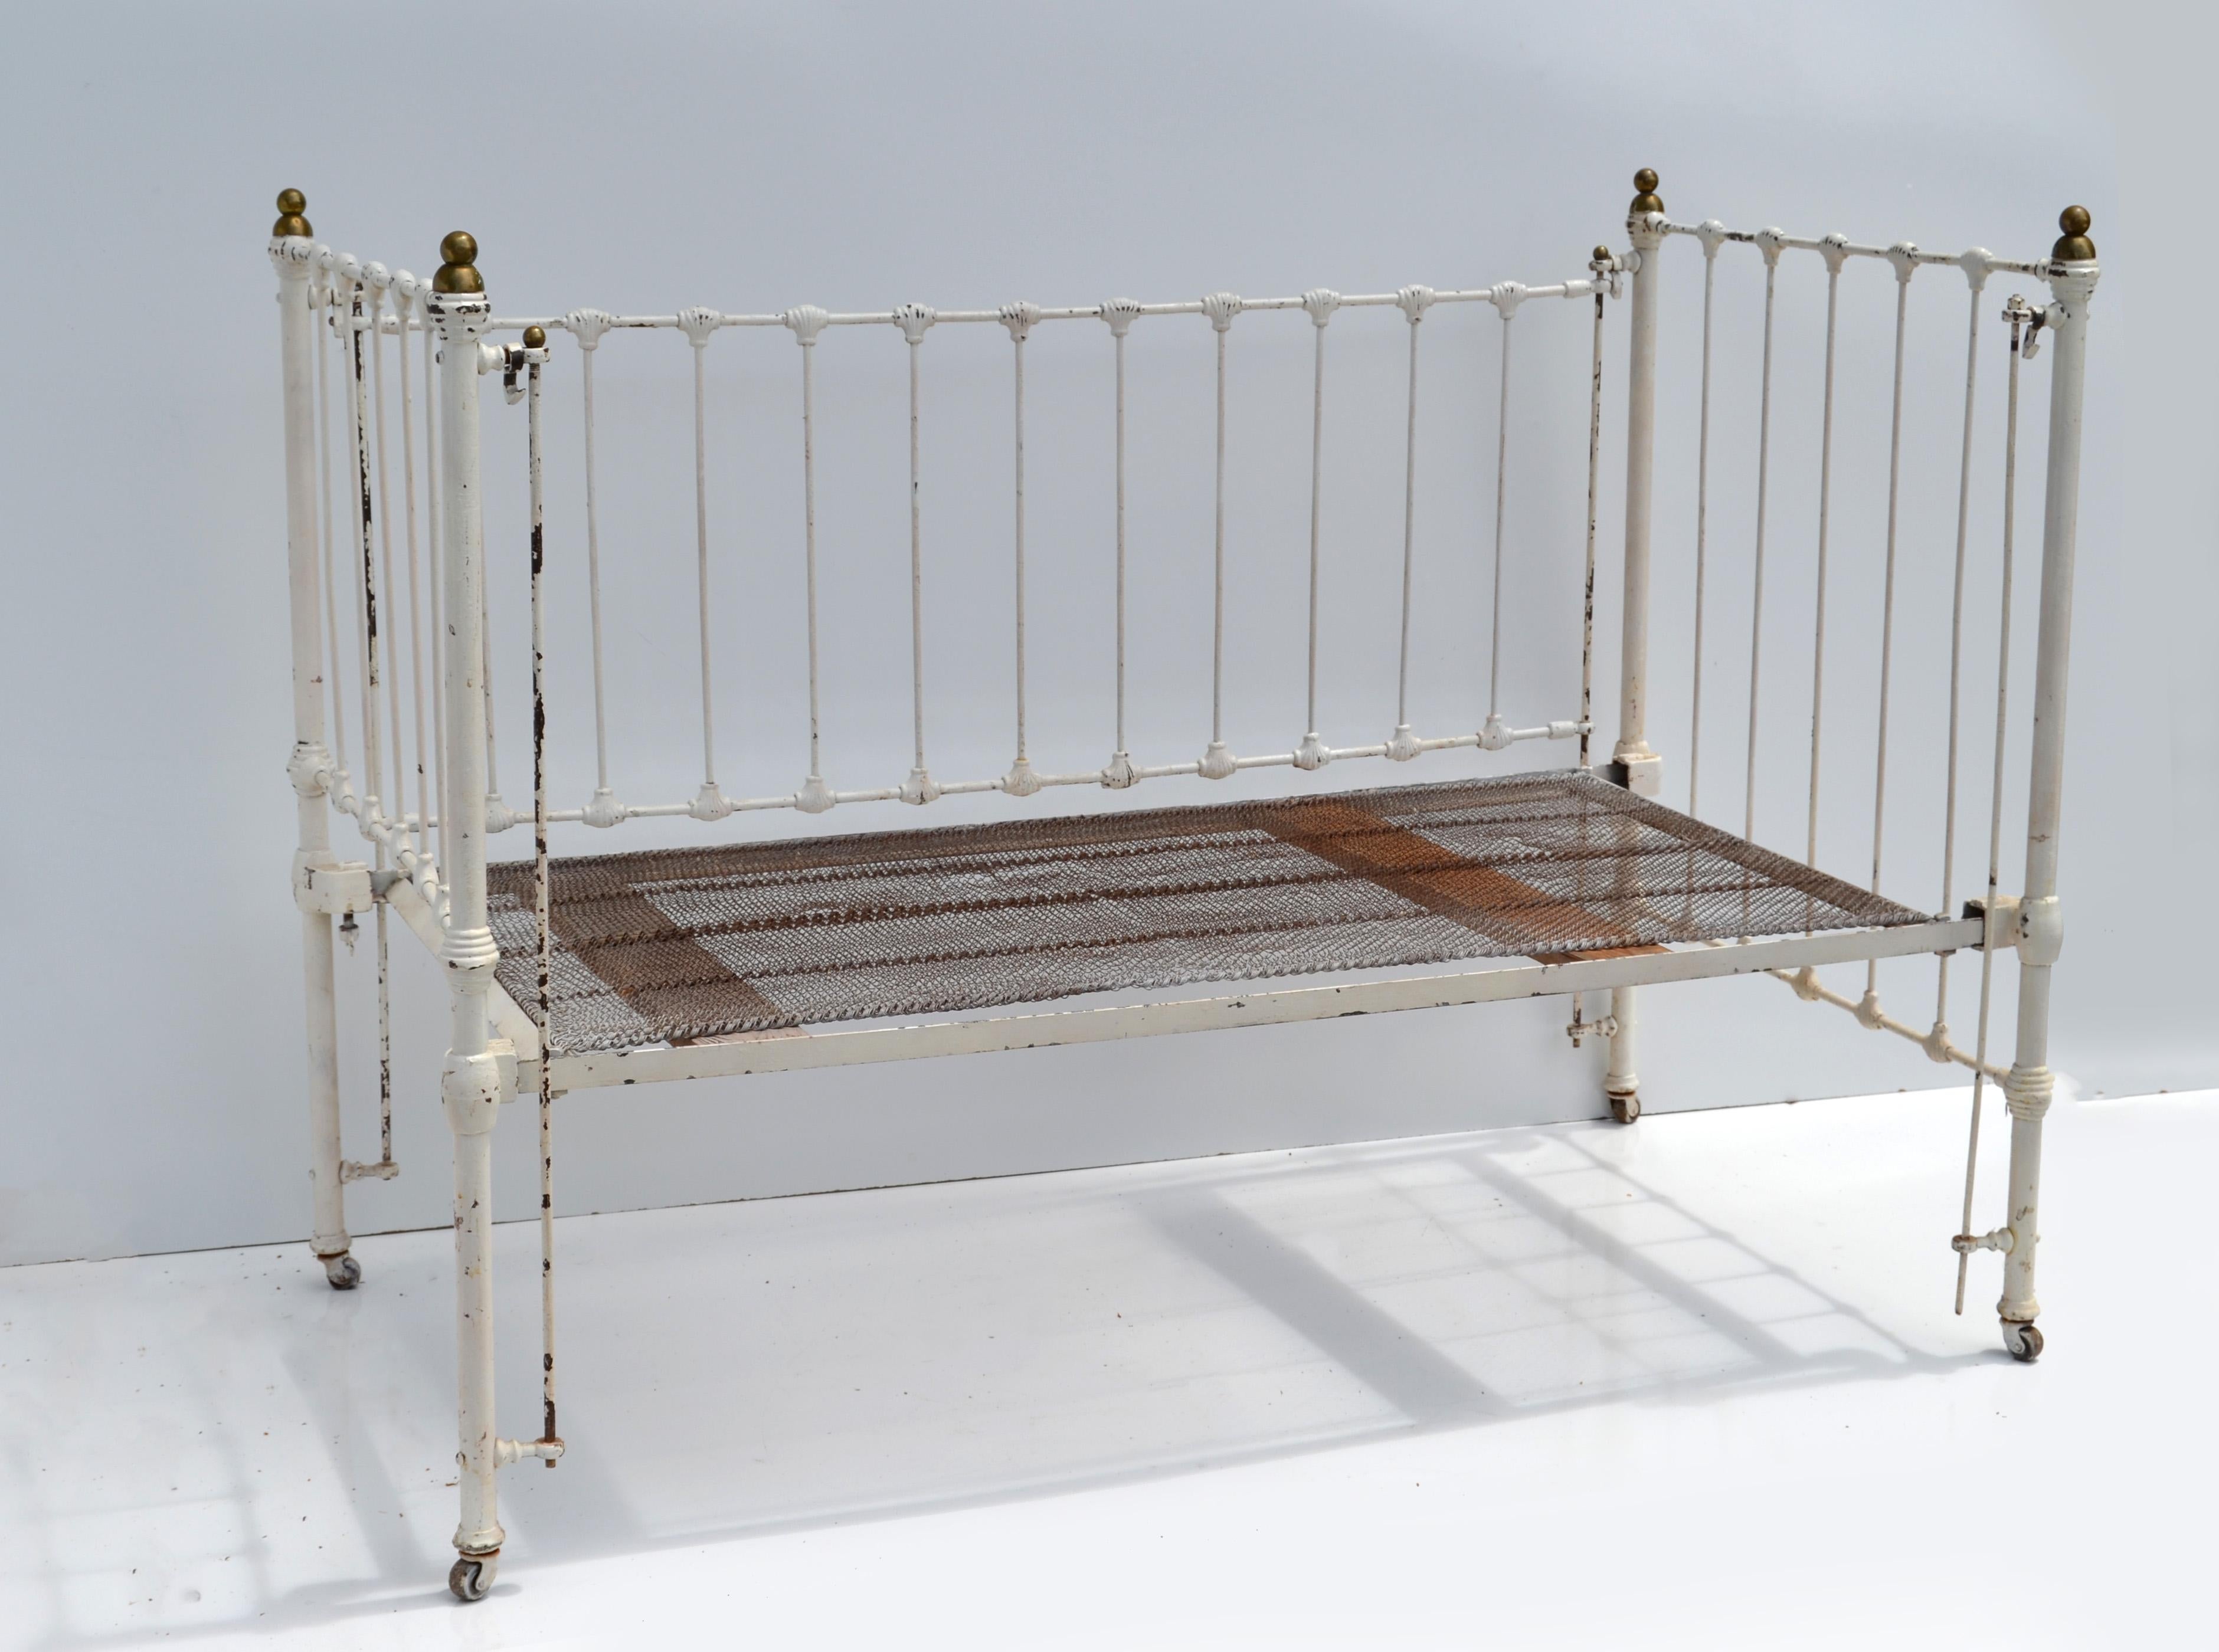 Beautiful Vintage antique distressed white finished Iron Crib with Nautical Shells and Brass knobs on the Top.
Comes with Springs on Slat Boards.
Rustic County Cottage Style with Shabby Chic Look.
Can be used with a Standard Size Crib Mattress (NOT